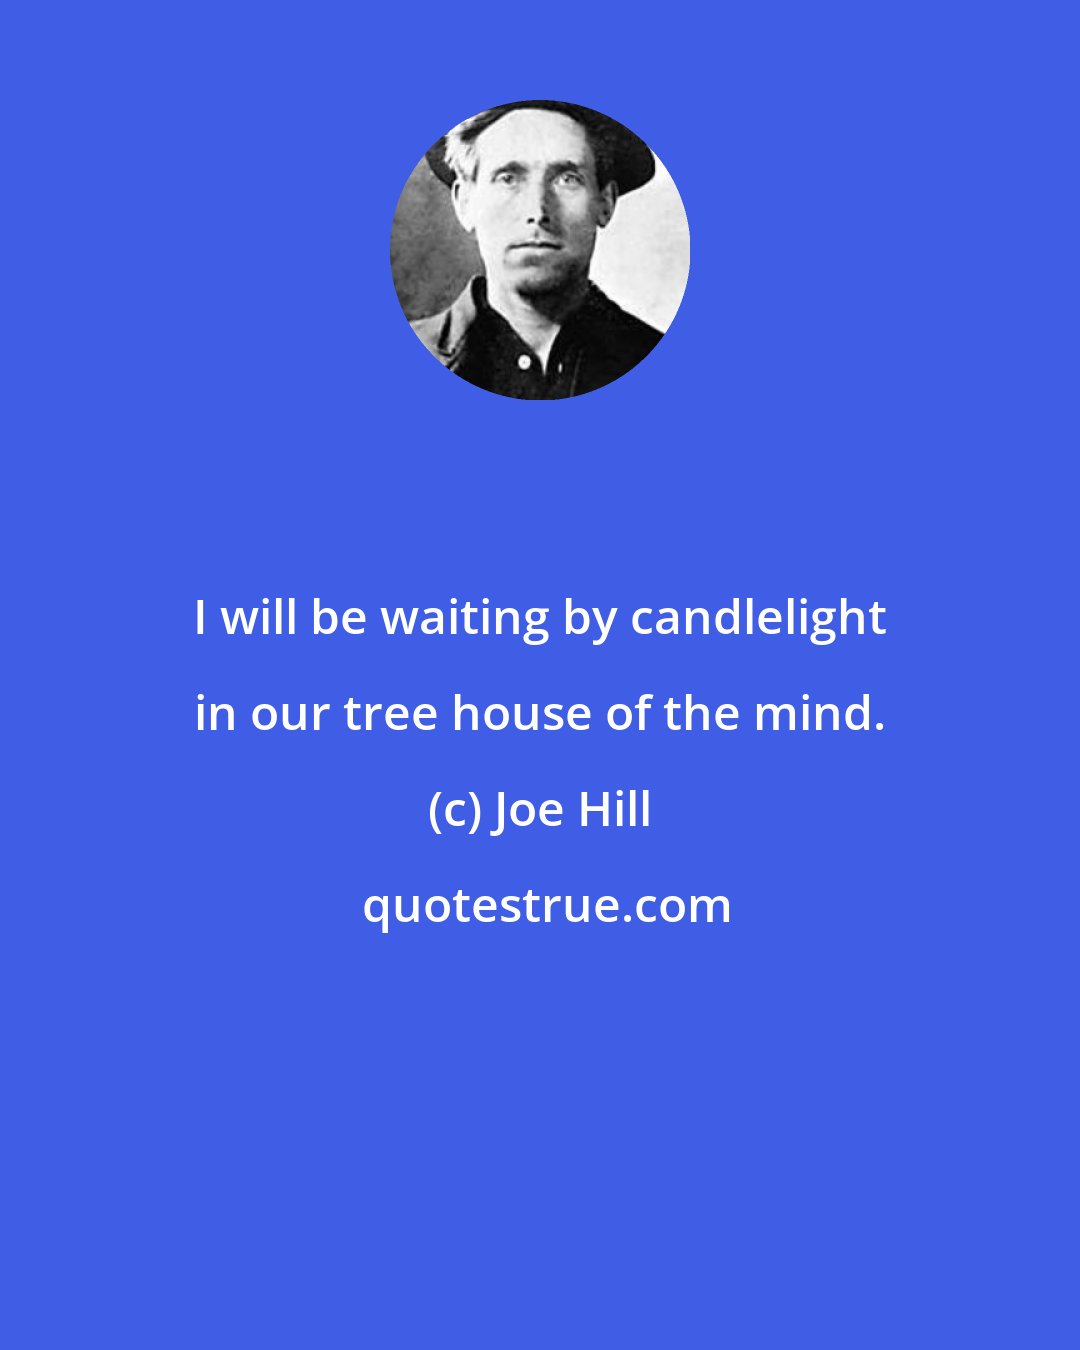 Joe Hill: I will be waiting by candlelight in our tree house of the mind.